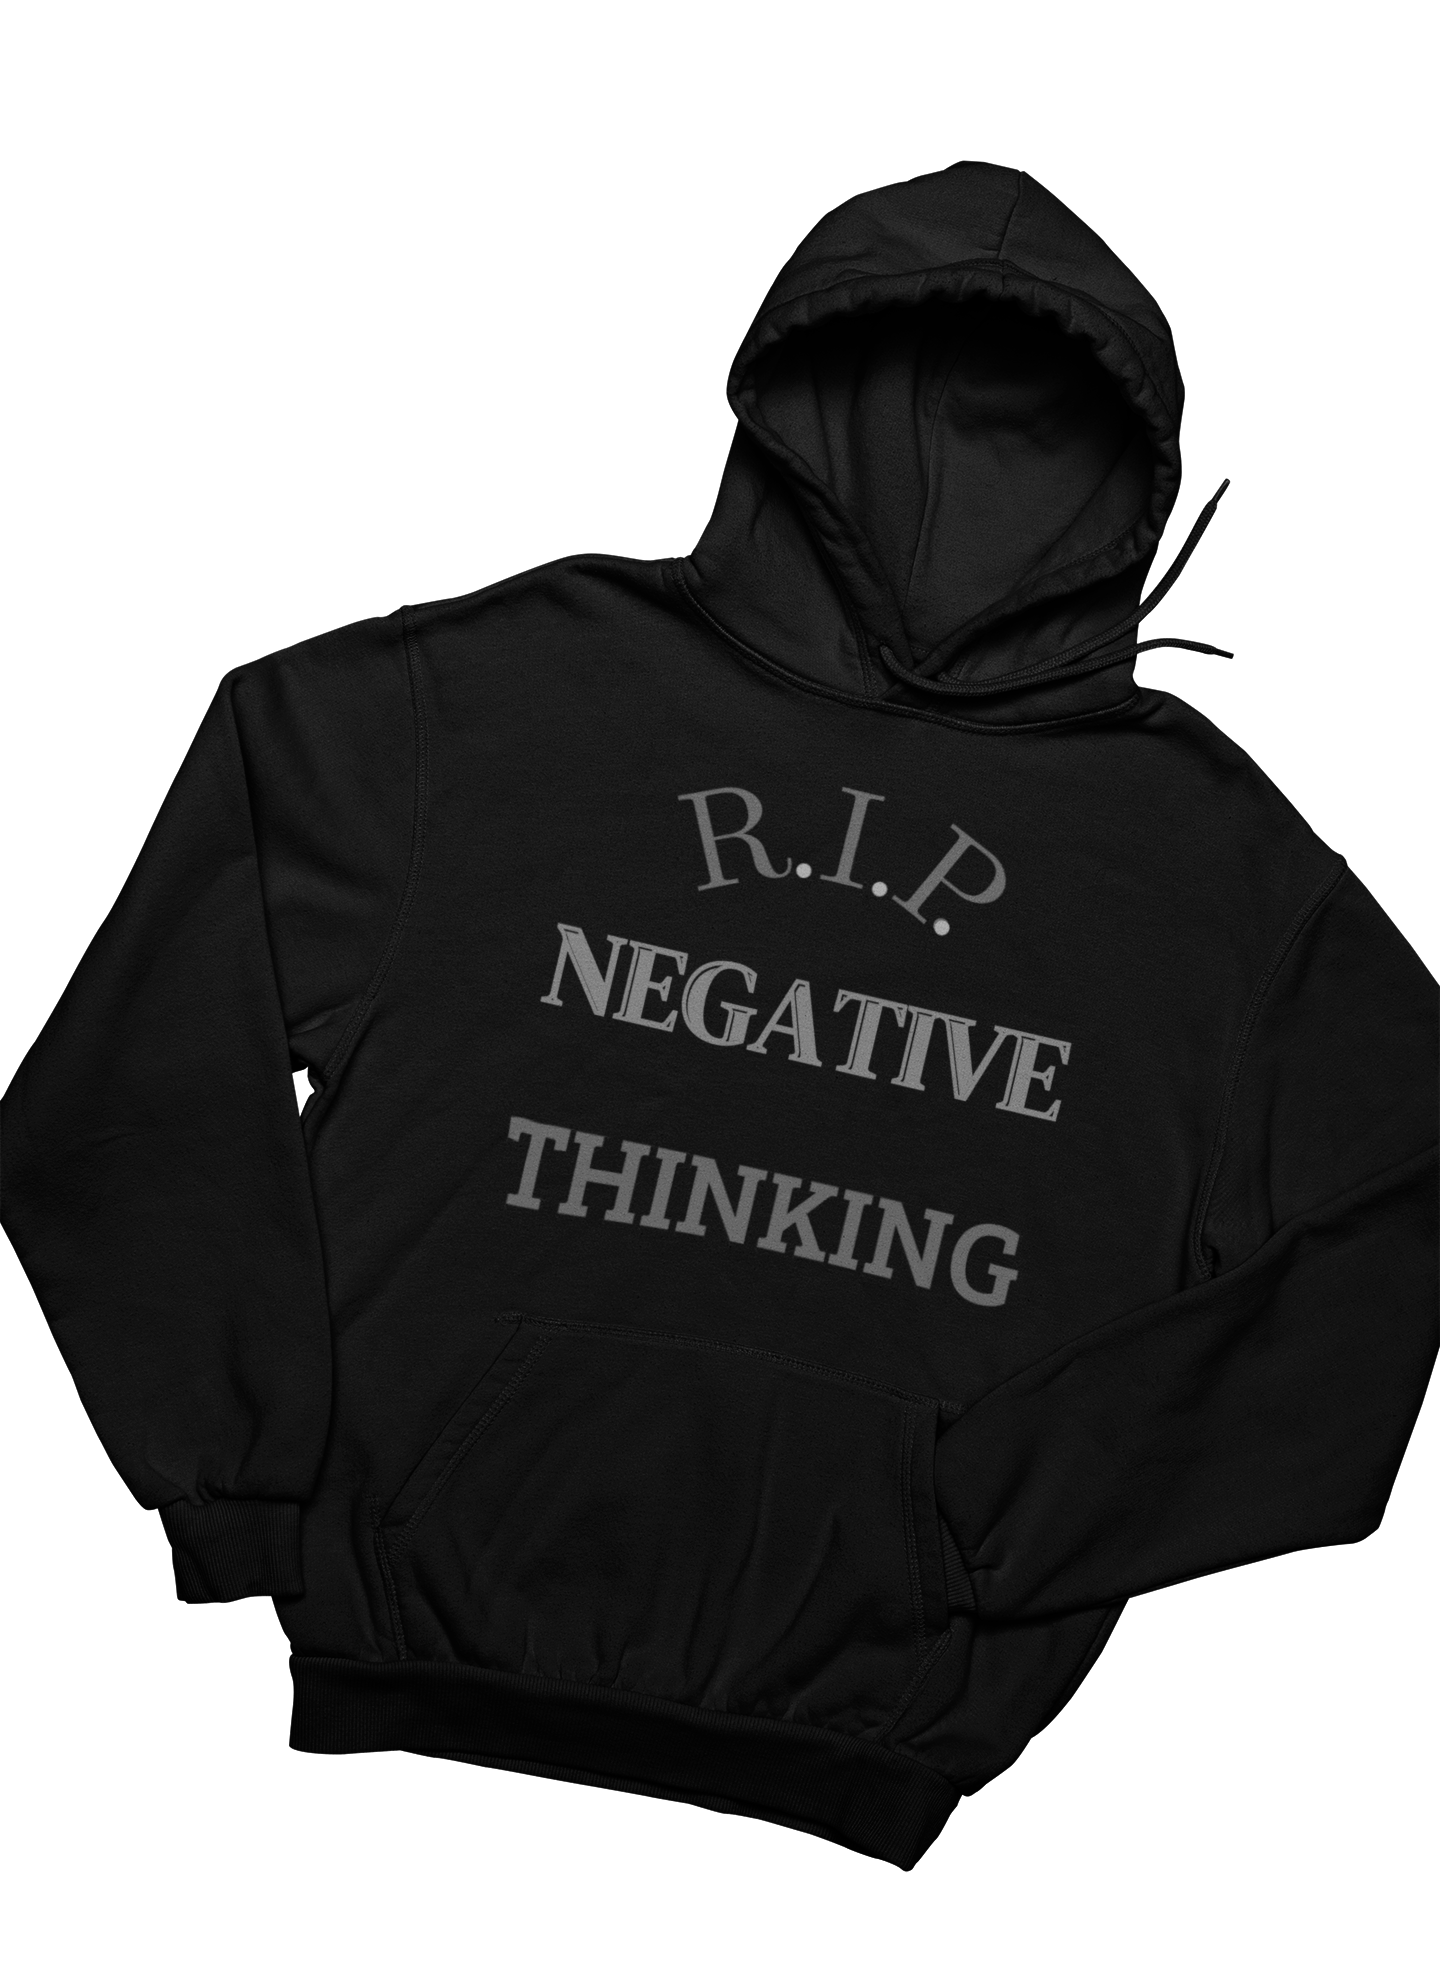 Shop for Hoodie Sweatshirts with Motivational Messages to Inspire Positive Thinking and Self Belief. Our FLI PÊP! store features Organic Eco-Friendly hoodie sweatshirts to inspire you to be your best self. Our Hoodies are made to fit just right and eliminate negative thinking.